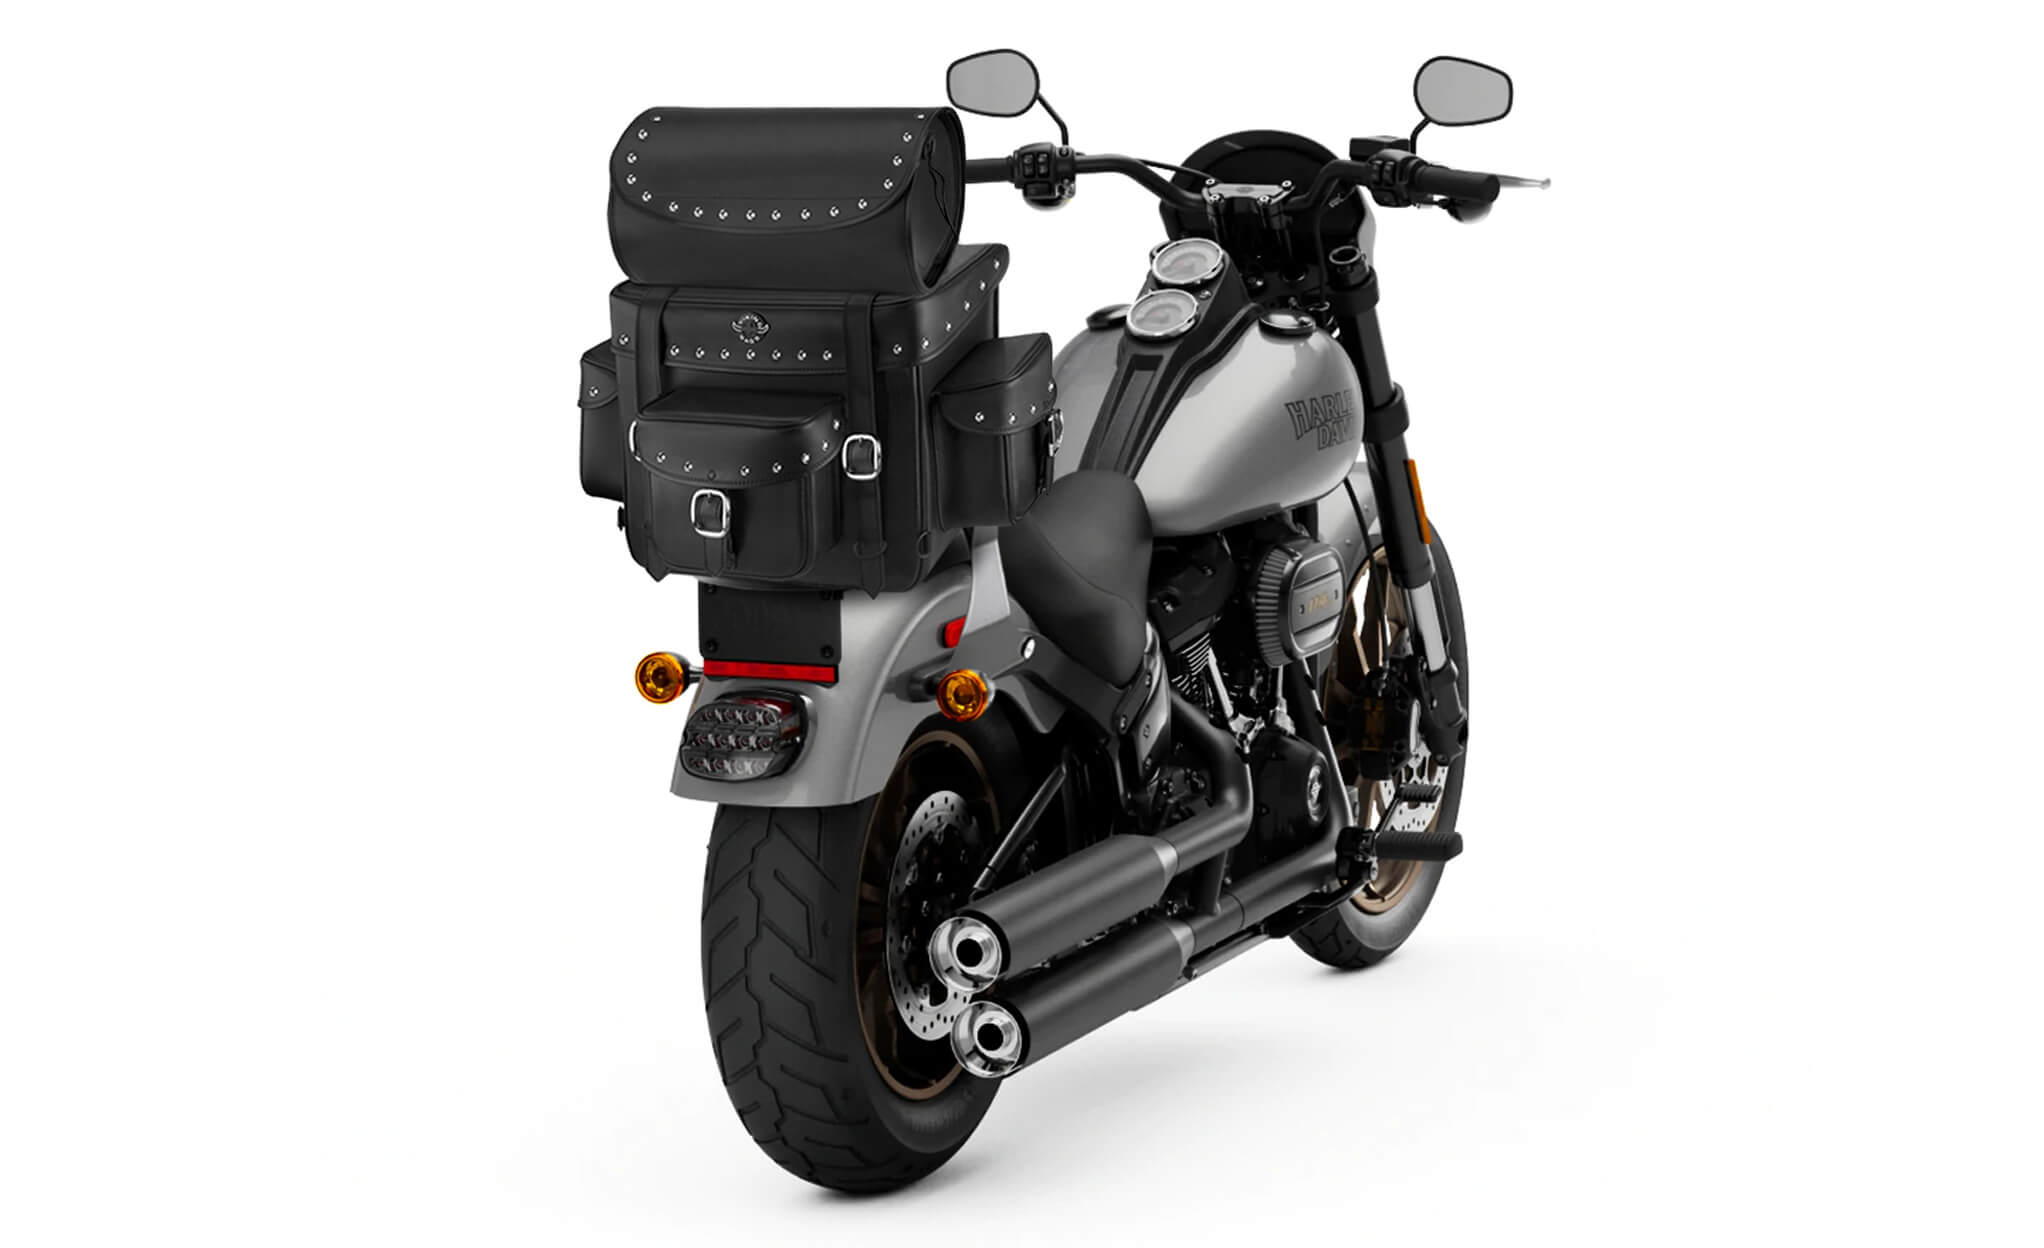 Viking Revival Series Large Hysoung Studded Motorcycle Sissy Bar Bag Bag on Bike View @expand